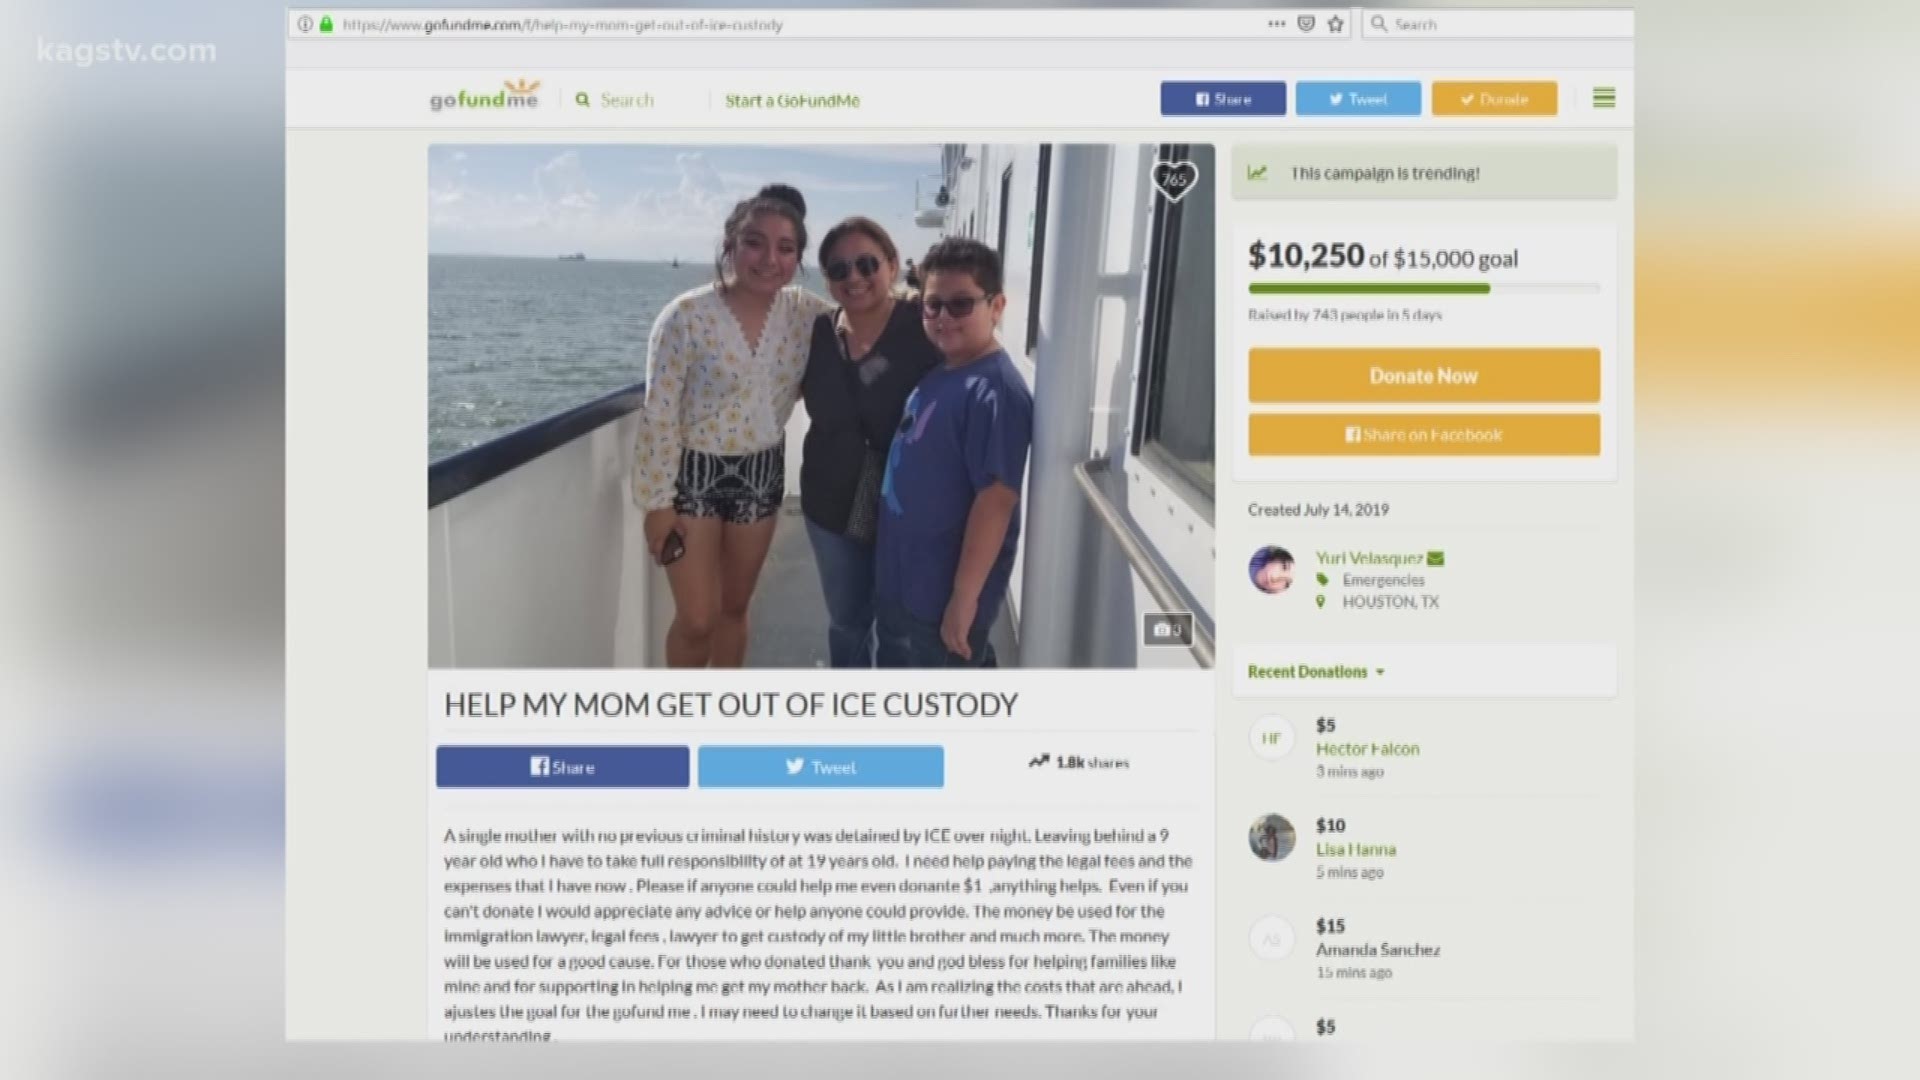 The money donated to the GoFundMe will be used for her mother's legal expenses.